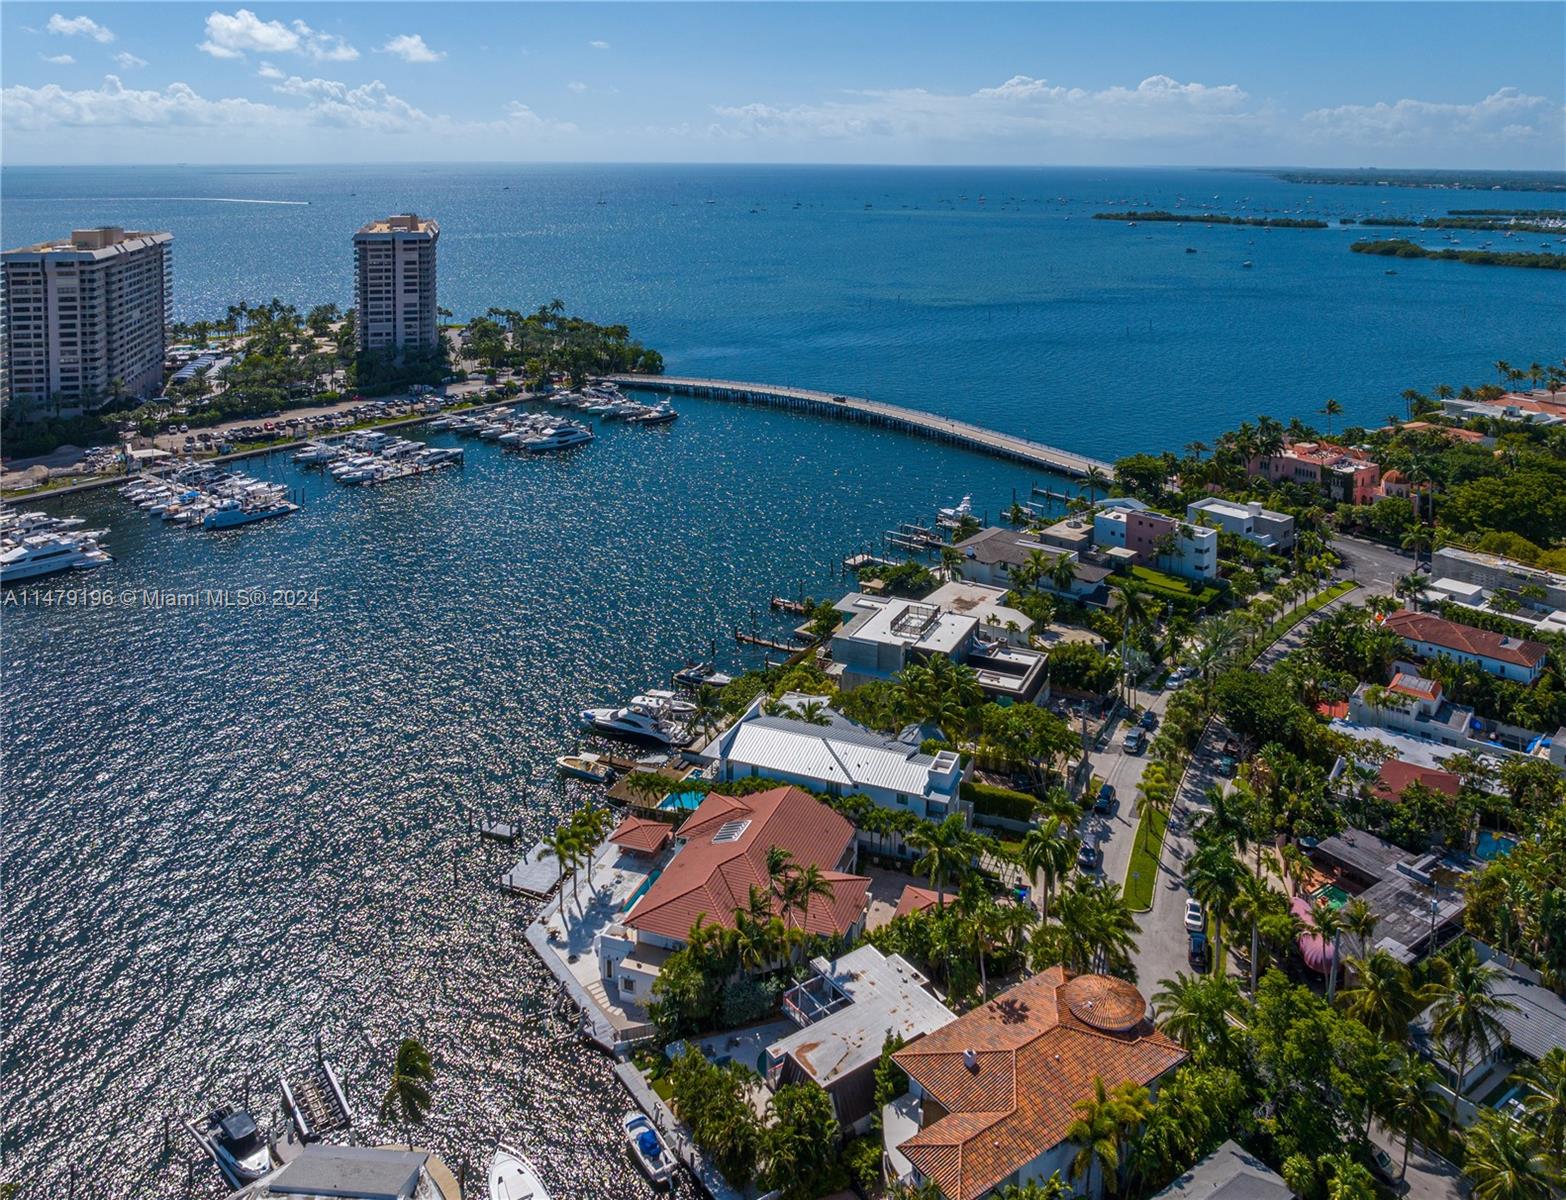 Nestled in a tranquil tropical haven on the exclusive Coconut Grove bayfront, this property boasts an impressive 139 feet of water frontage on a spacious point lot, featuring rare and substantial dockage. With a newly adjusted price, this offering presents an unparalleled value in one of Miami's most esteemed neighborhoods. The existing 7000-sqft home comprising 8 bedrooms and 10.5 baths, provides a perfect canvas for modern enhancements or a complete redevelopment. Additionally, the house can be leased during the design and permitting phases, providing an excellent investment opportunity. Easy access to the seaside village of Coconut Grove, fine dining and shopping, marina, parks and bikeways.